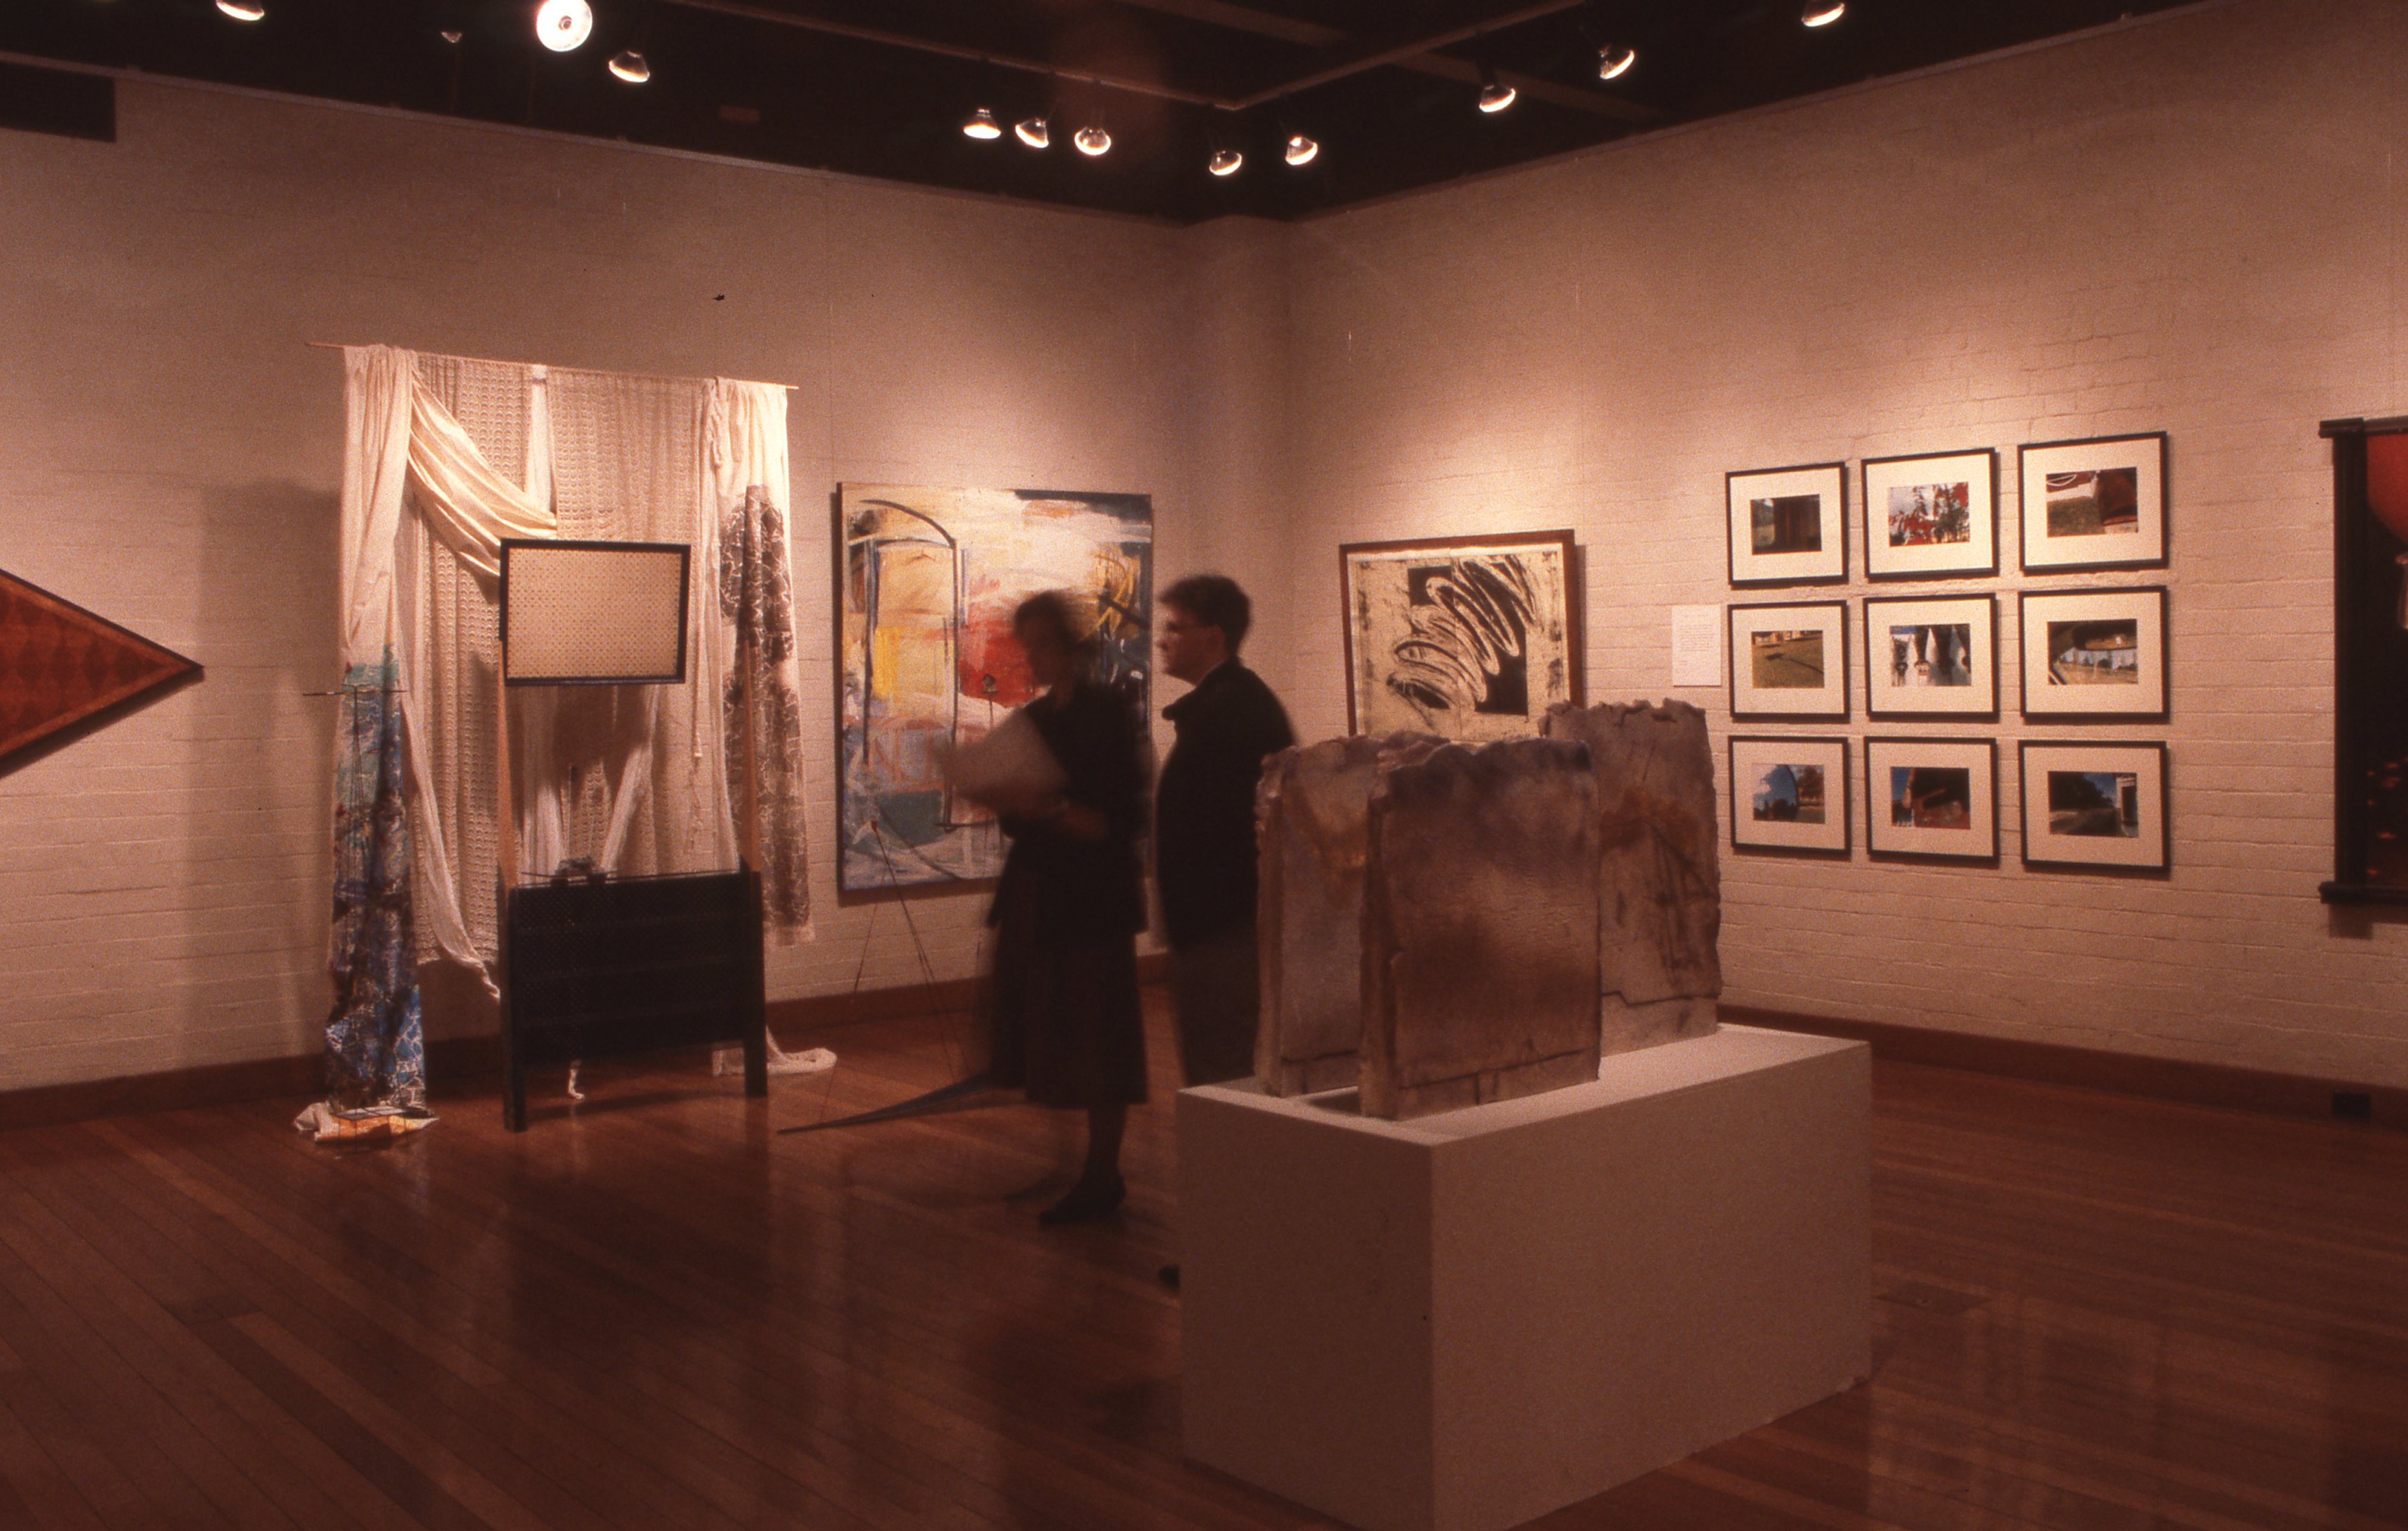 idg_archive_1987_post-graduate_masters_student_exhibitions_001_install.jpg